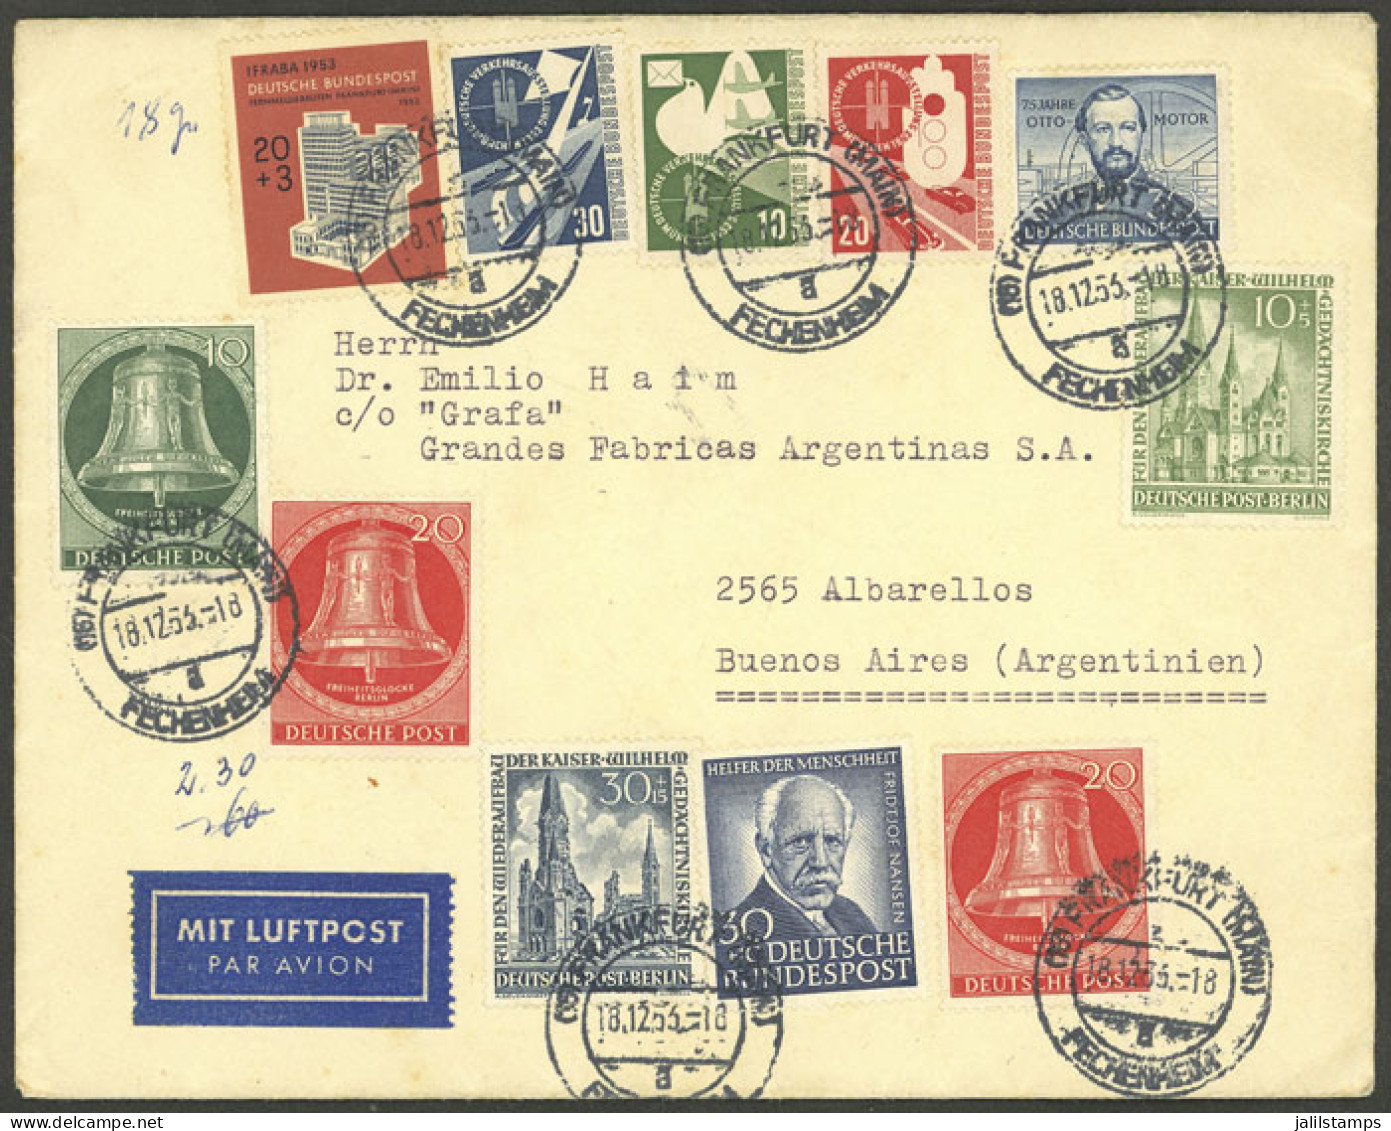 WEST GERMANY: 18/DE/1953 Frankfurt - Argentina, Airmail Cover With Spectacular Multcolor Postage, Very Fine Quality. The - Covers & Documents